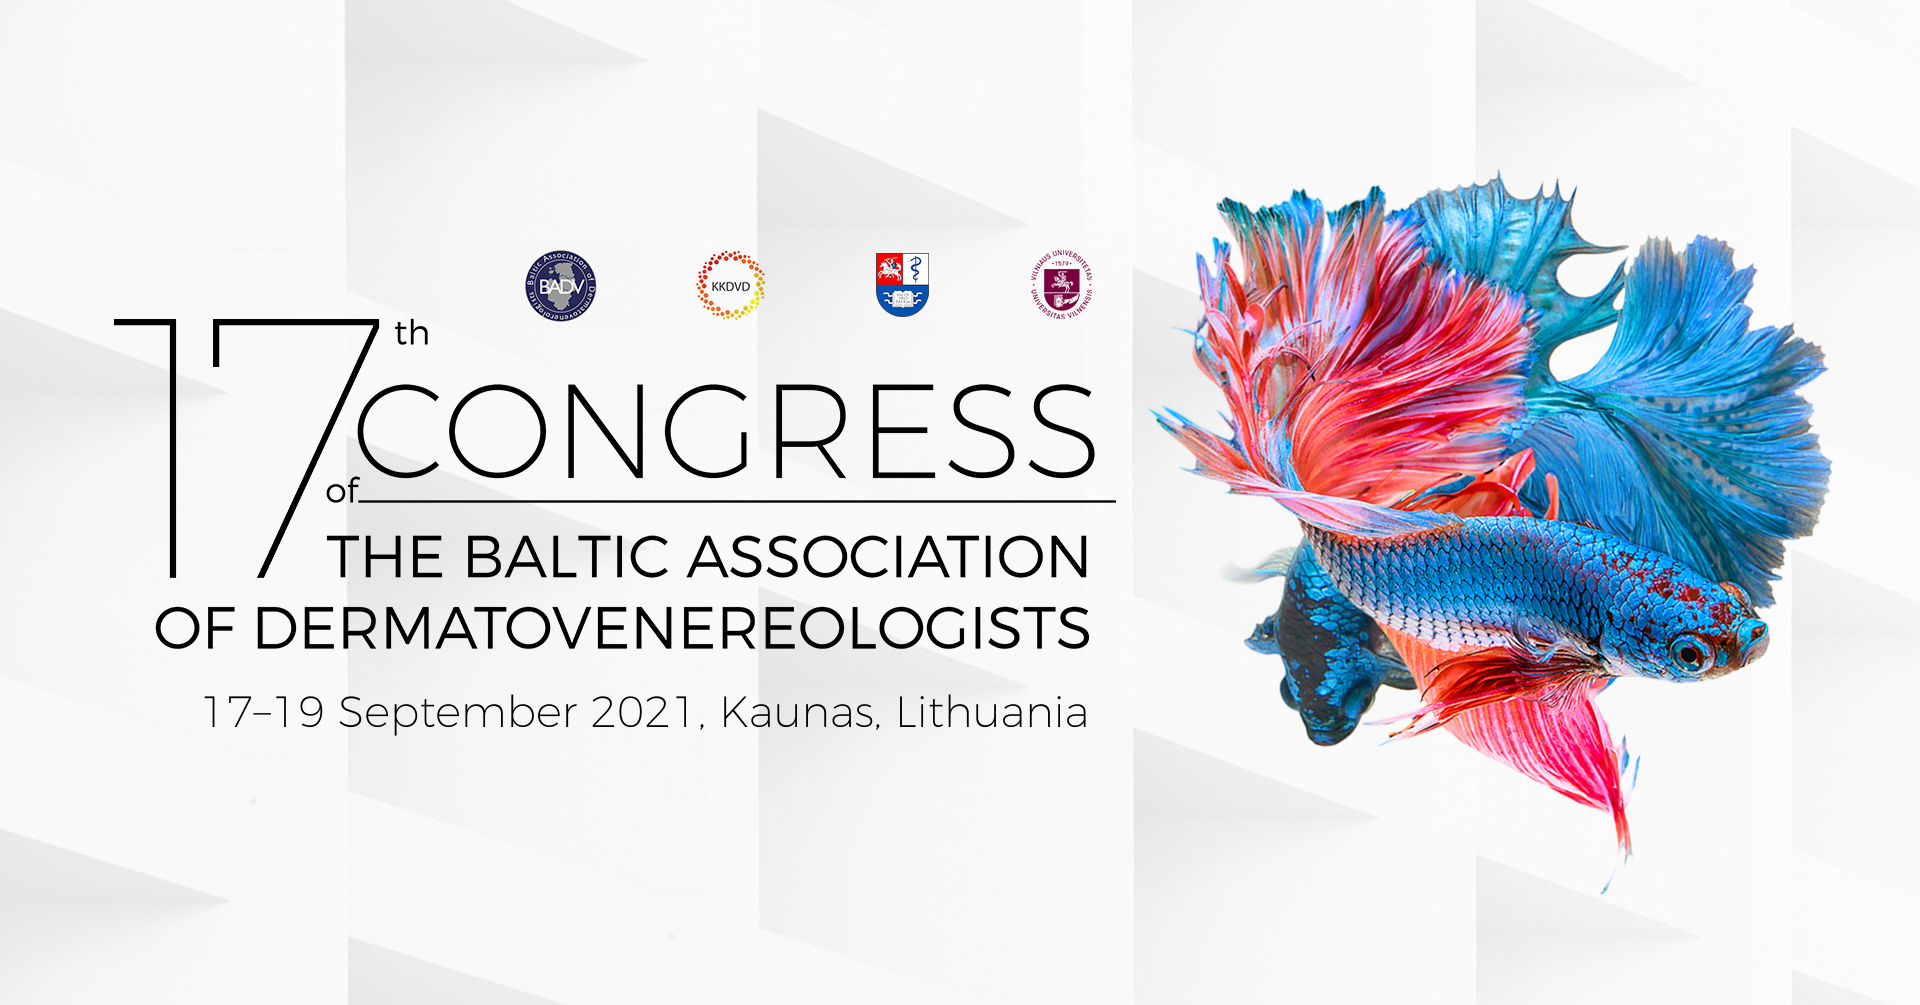 17th Congress of the Baltic Association of Dermatovenereologists